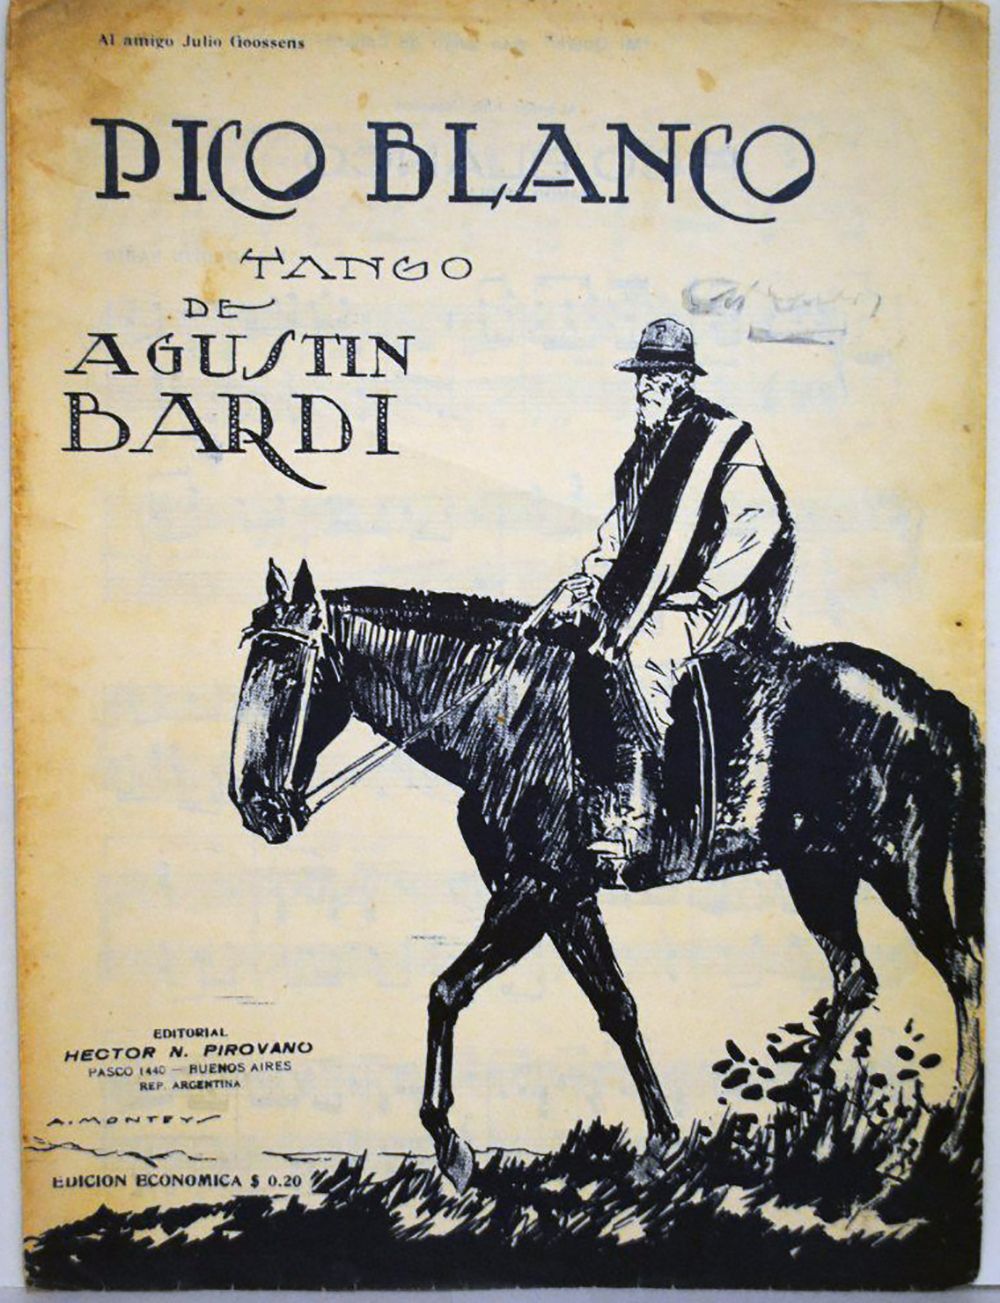 Pico blanco, Argentine Tango composed by Agustín Bardi. Music sheet cover